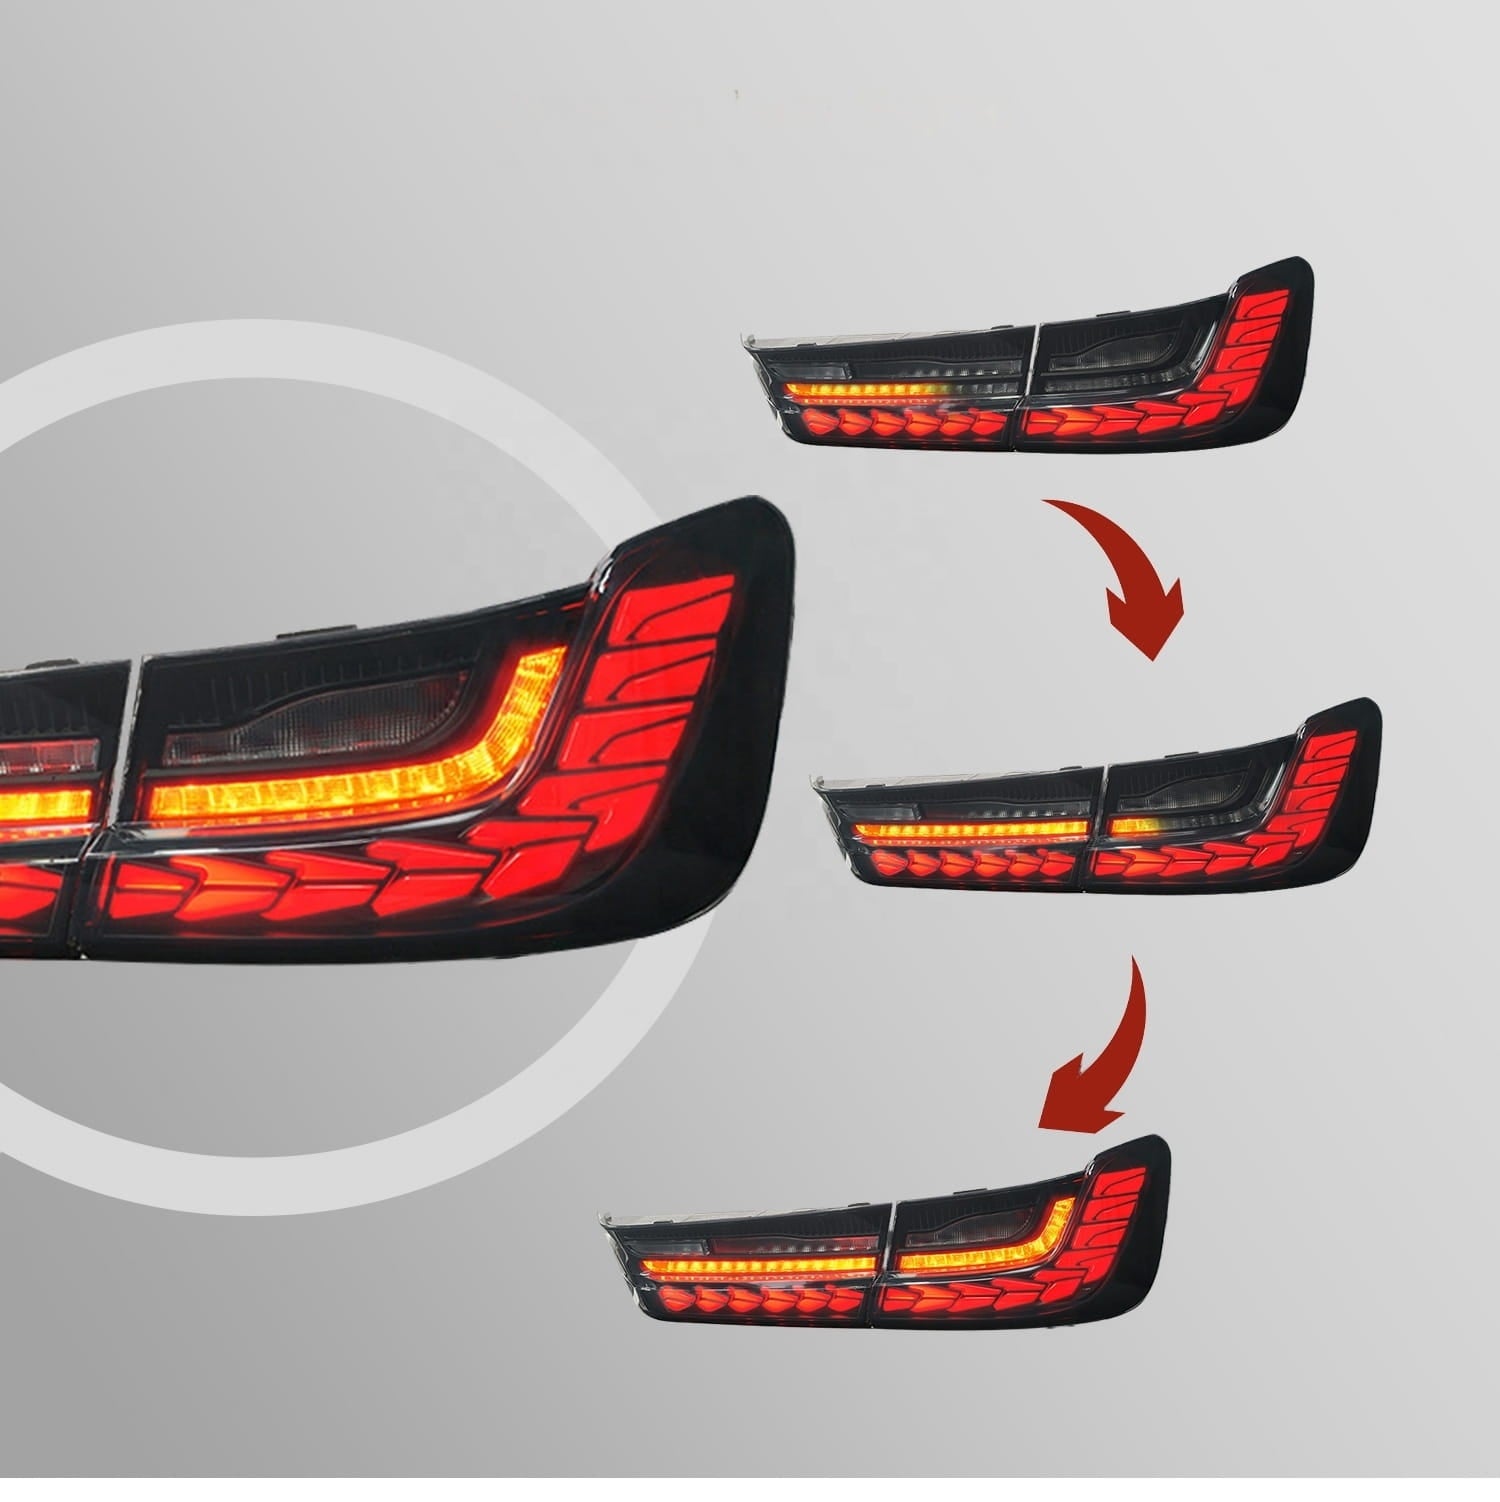 GTS Style OLED Tail Lights for G20 / G28 & G80 3 Series / M3 330i M340i